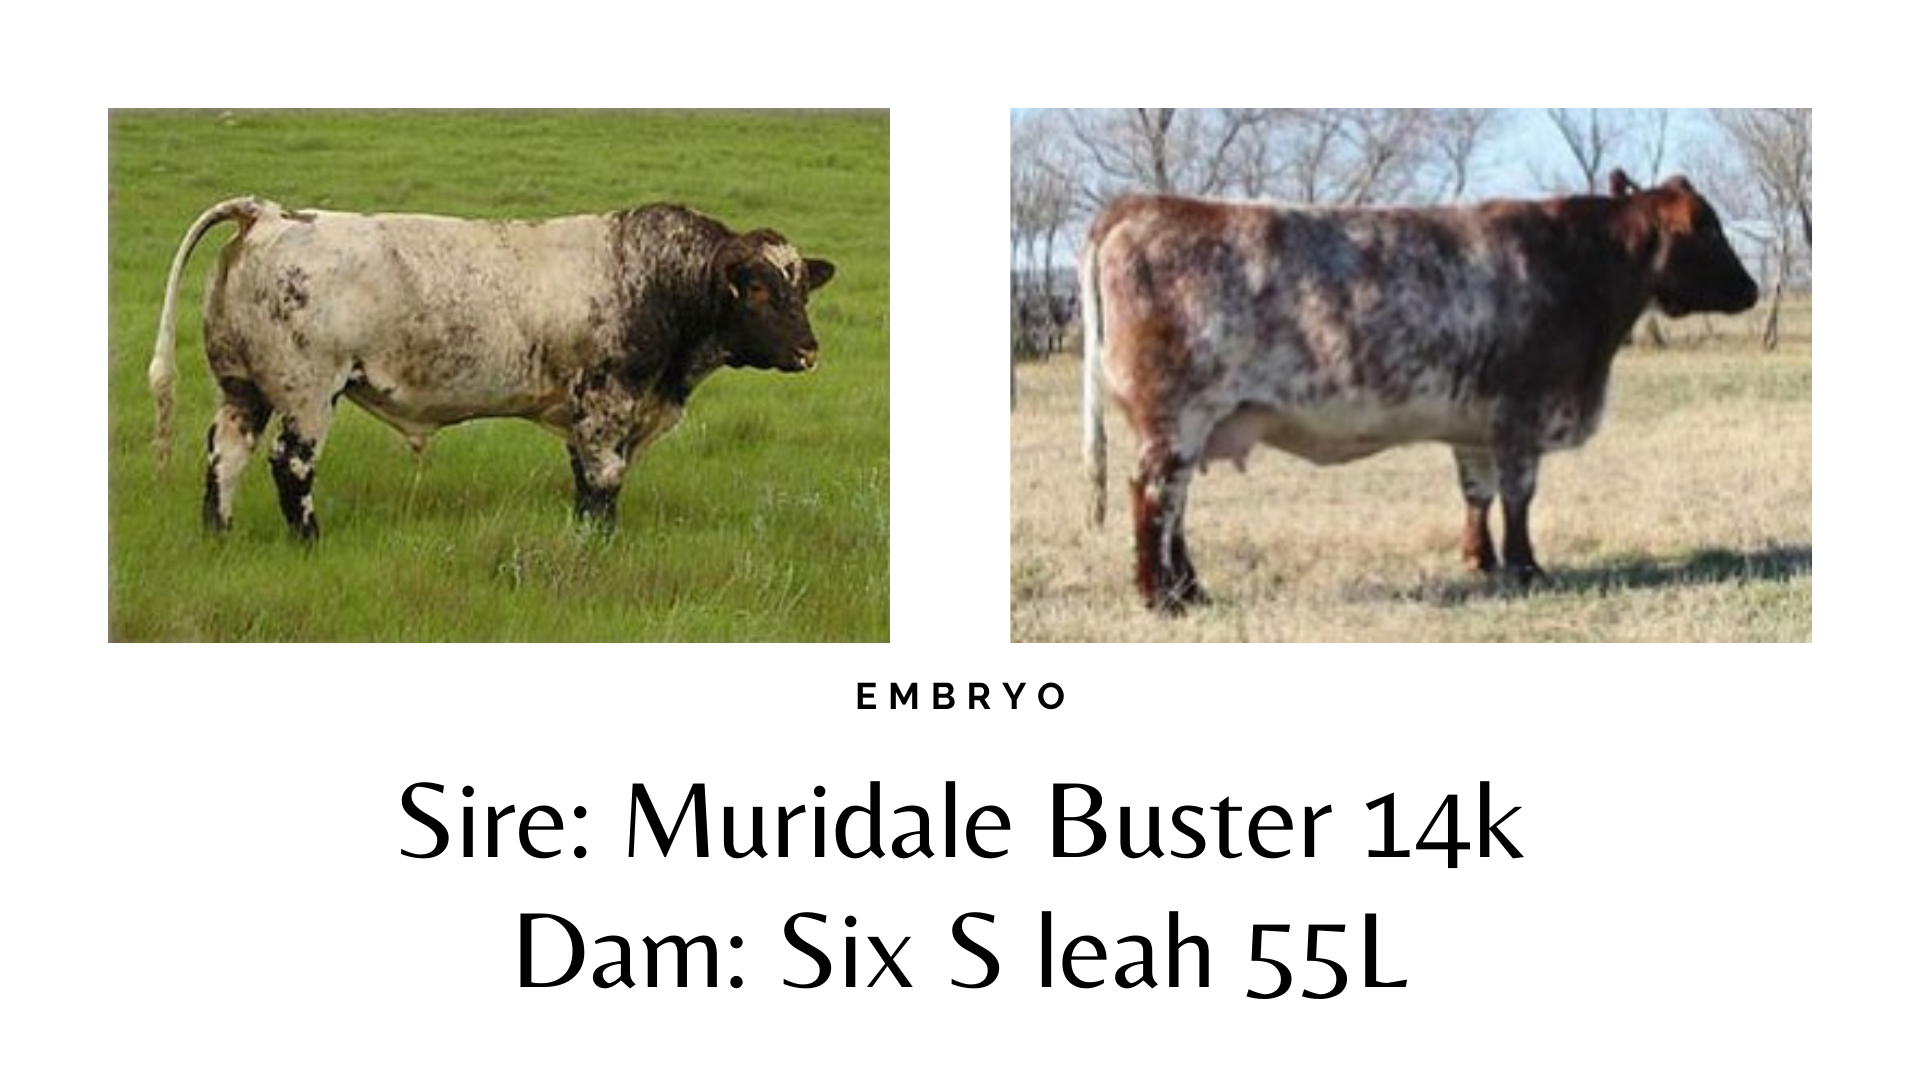 Sire DF Taladega 3x Is a barrel of beef, has tremendous muscle, good bone and rib structure and should be a perfect match for Sparkle Delight 2x, a p